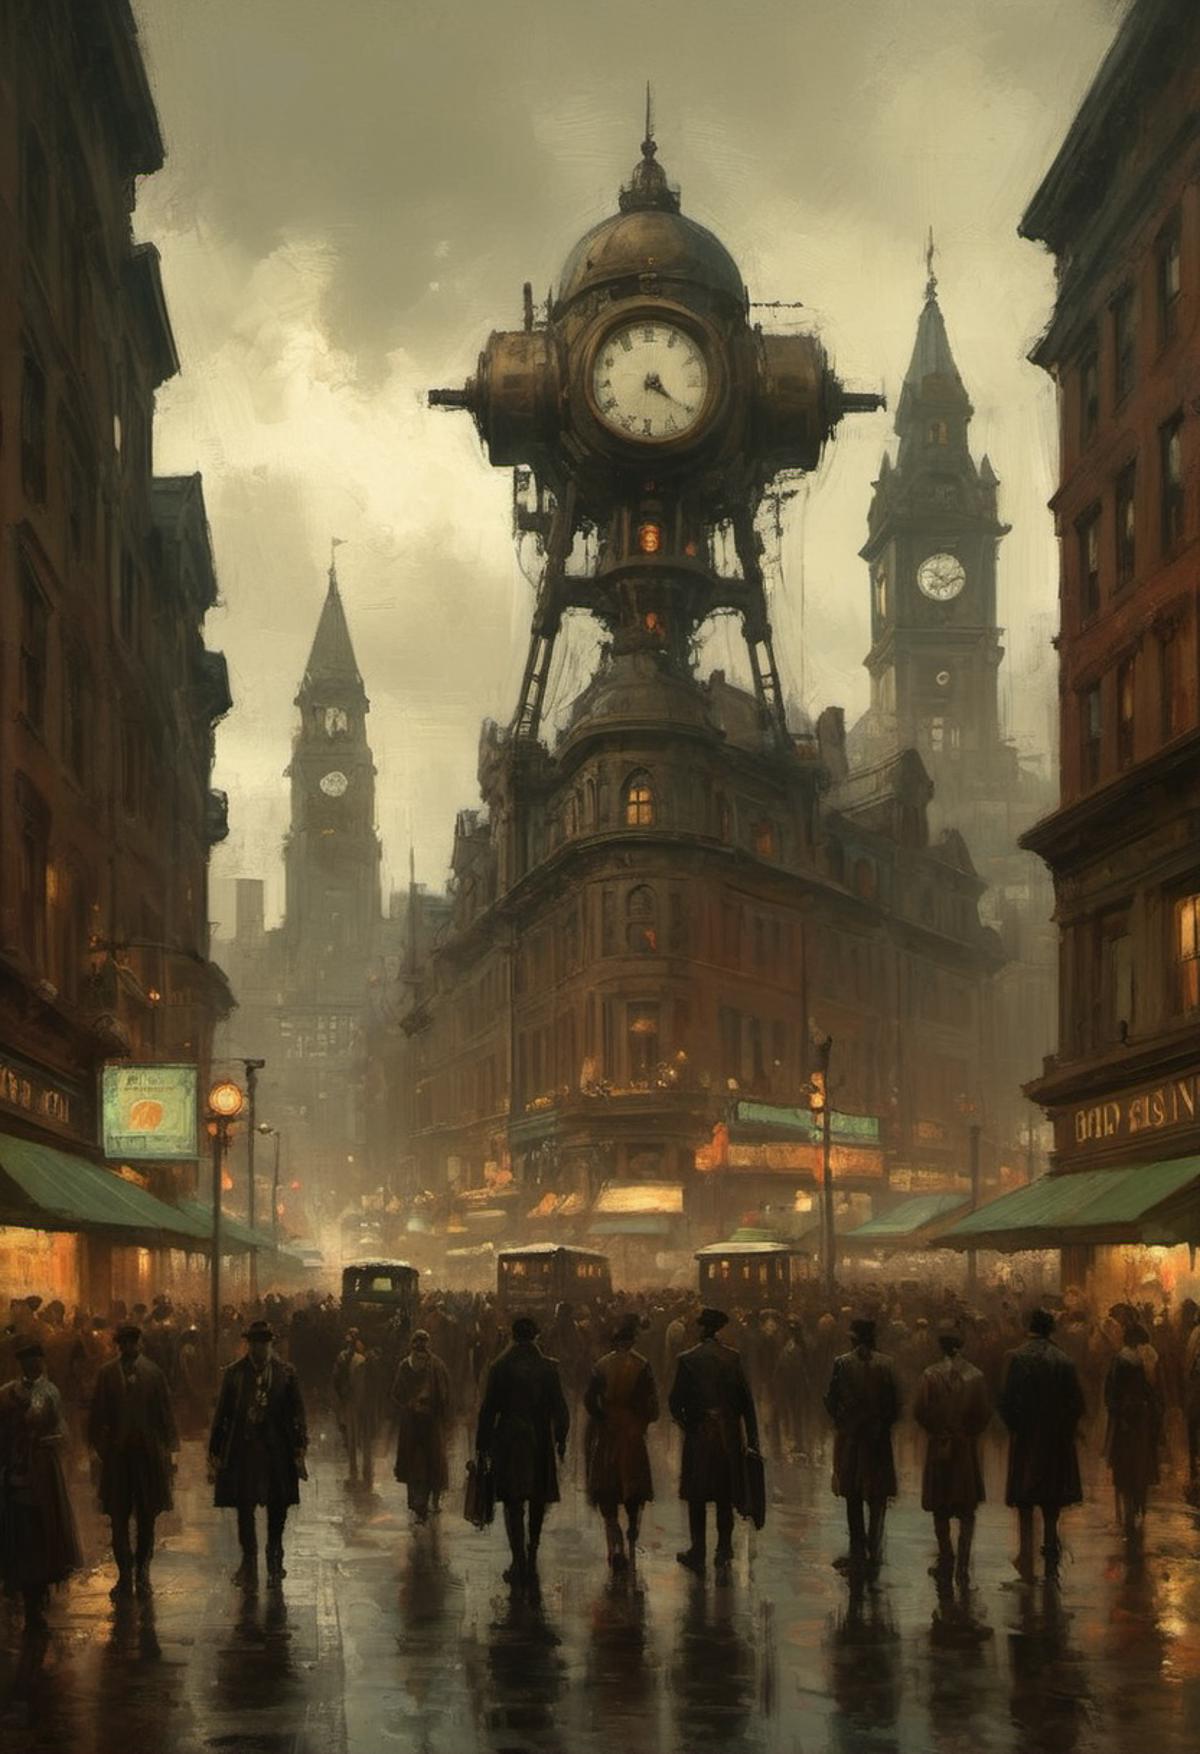 Artistic Painting of a Crowded City Street with an Old Clock Tower and Tall Buildings